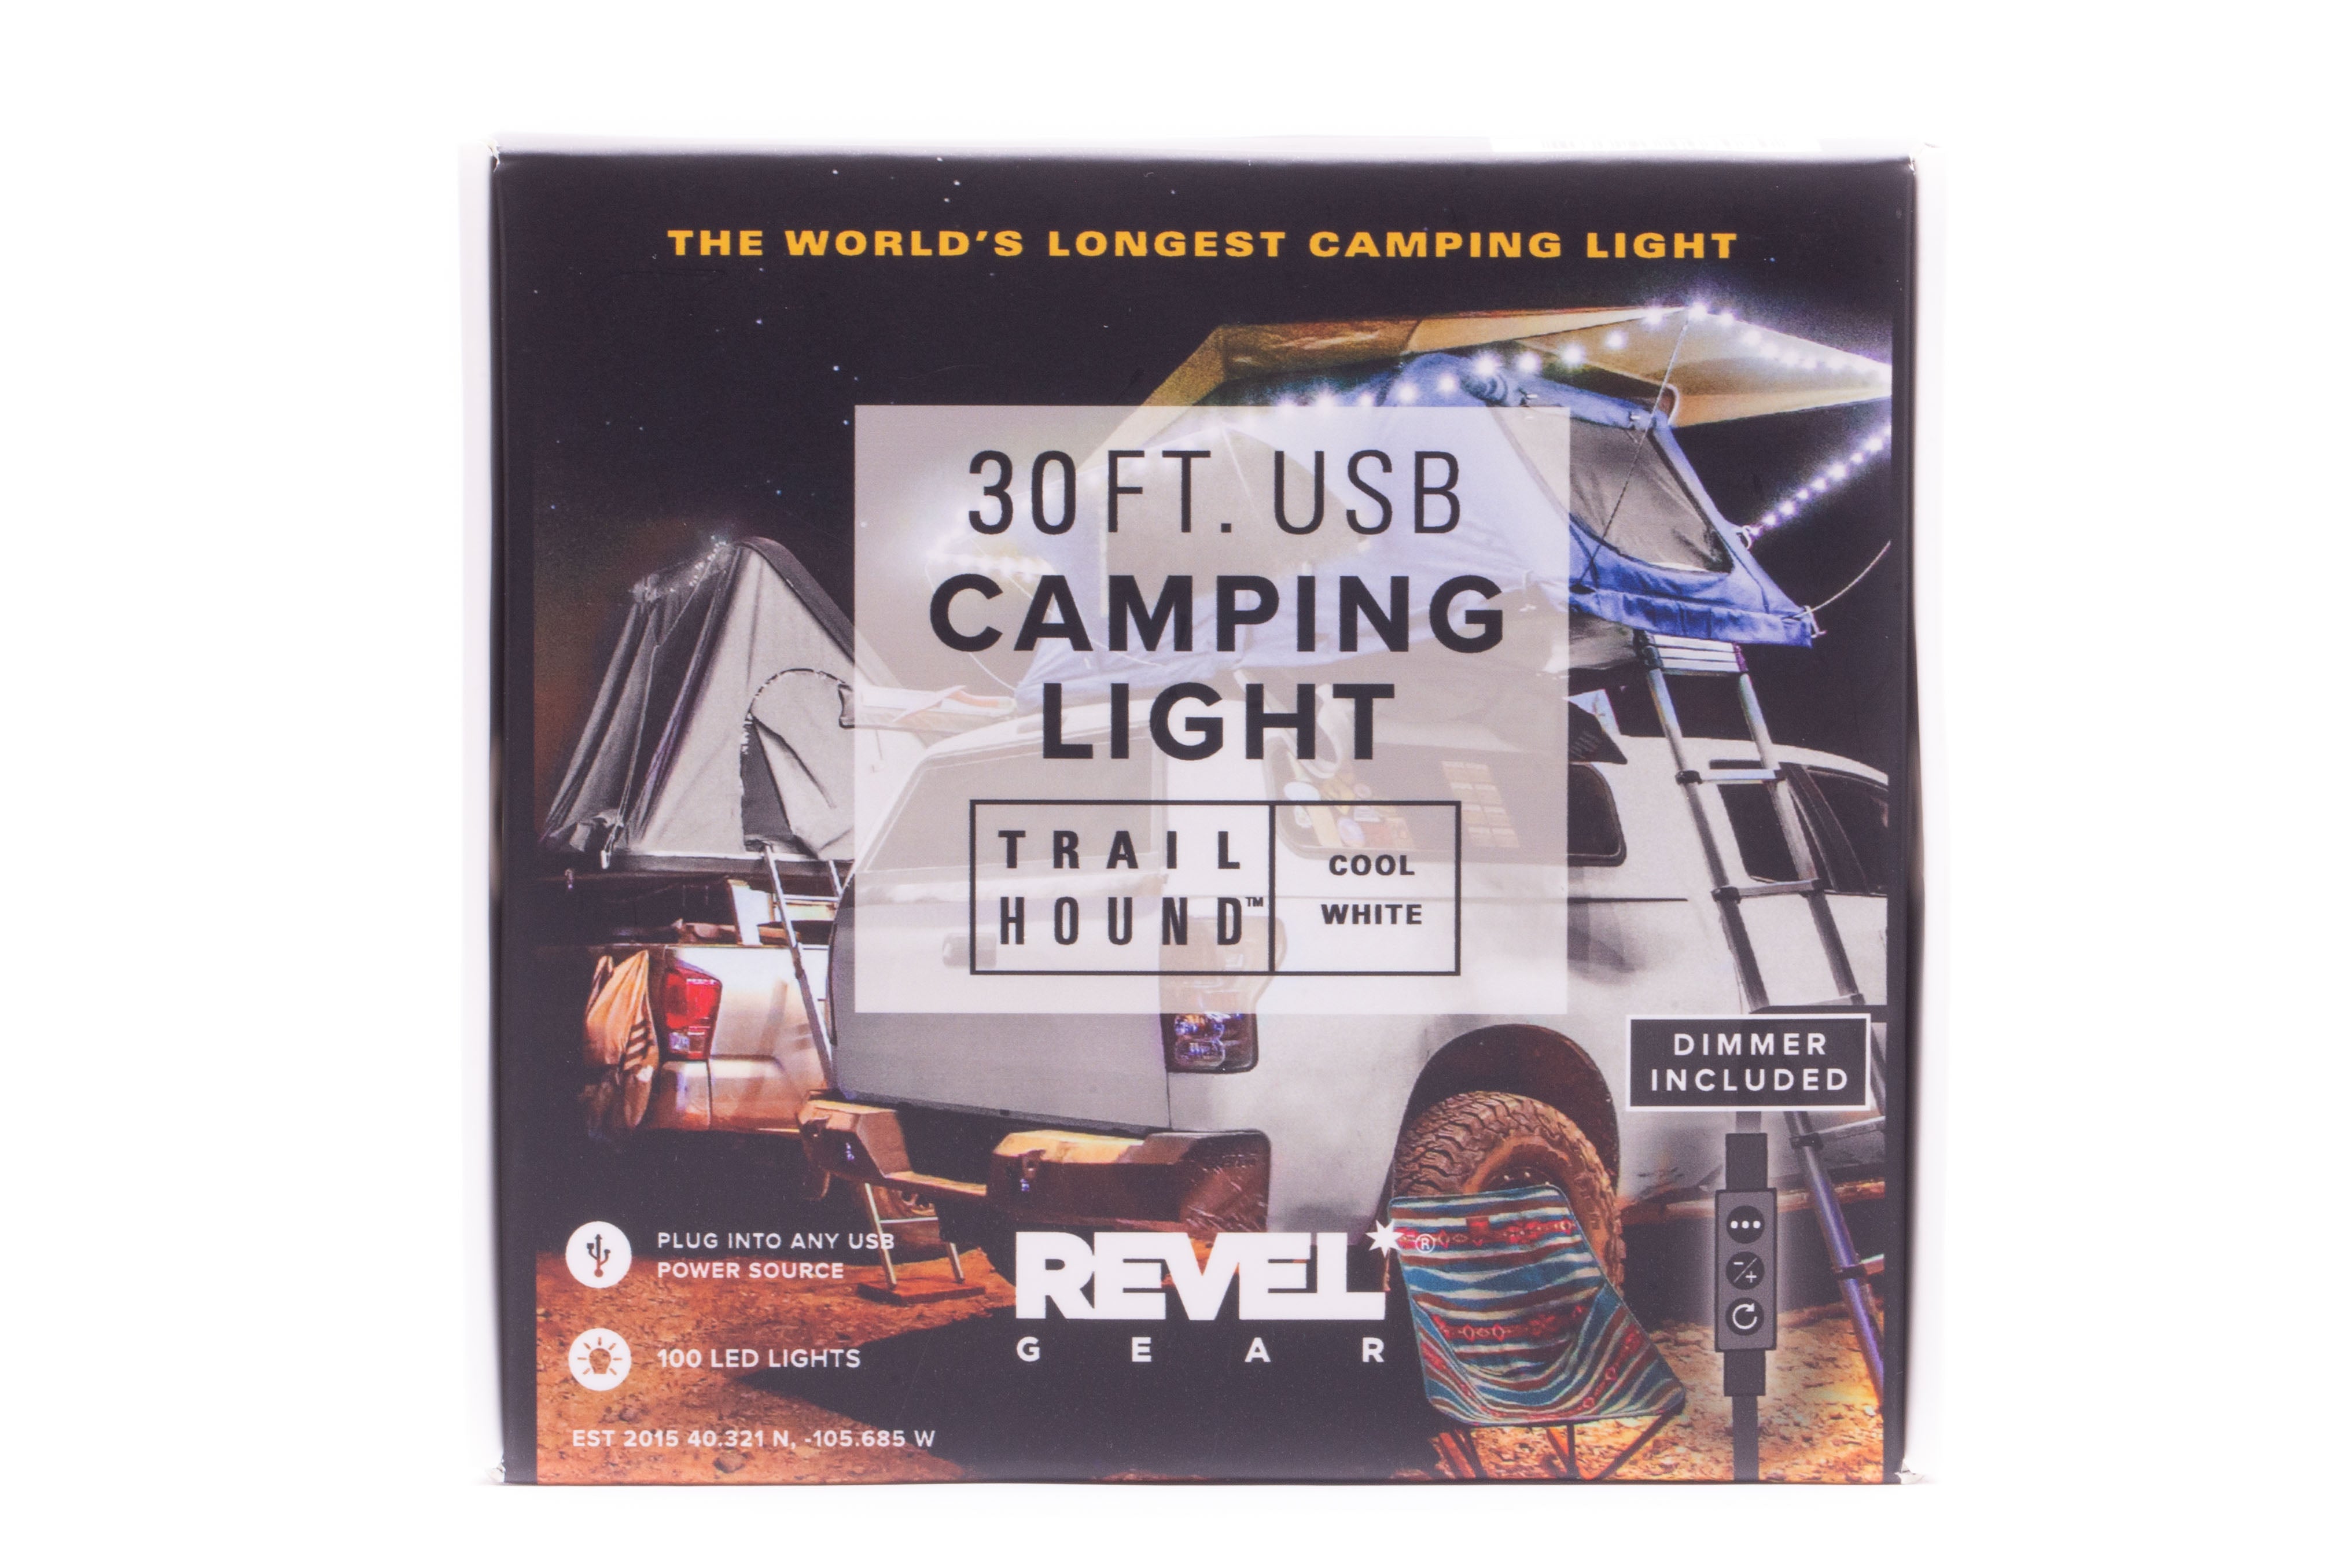 Revel Gear Trail Hound 30ft Camping Light Bright (Cool) White with Dimmer